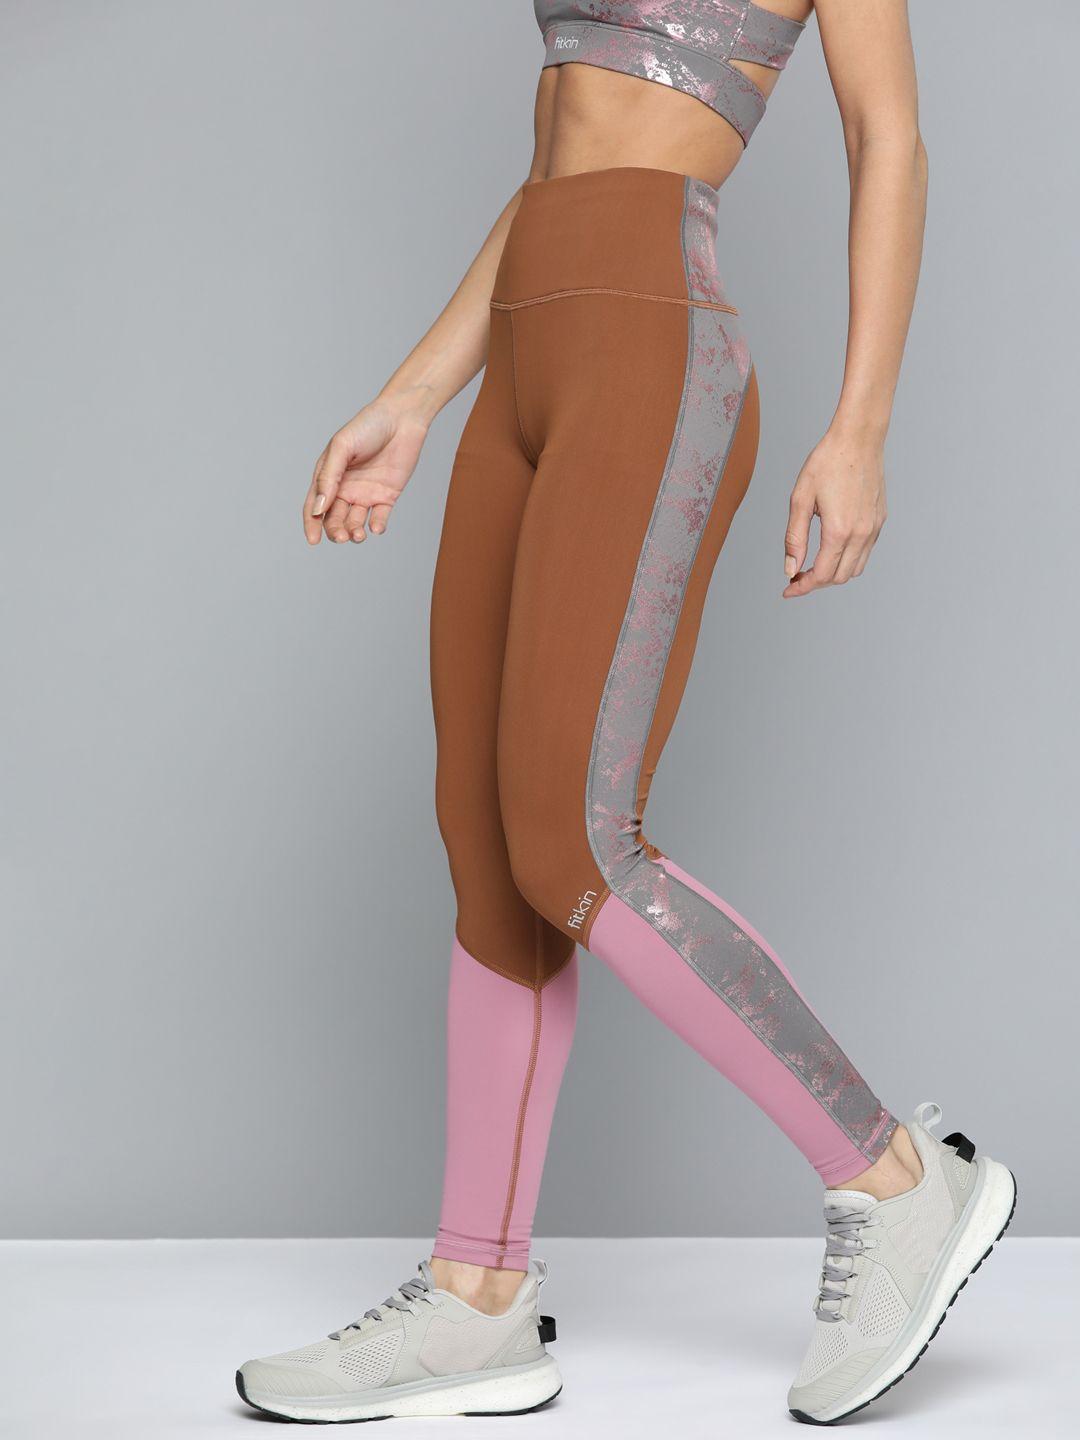 fitkin-women-brown-&-pink-colourblocked-tights